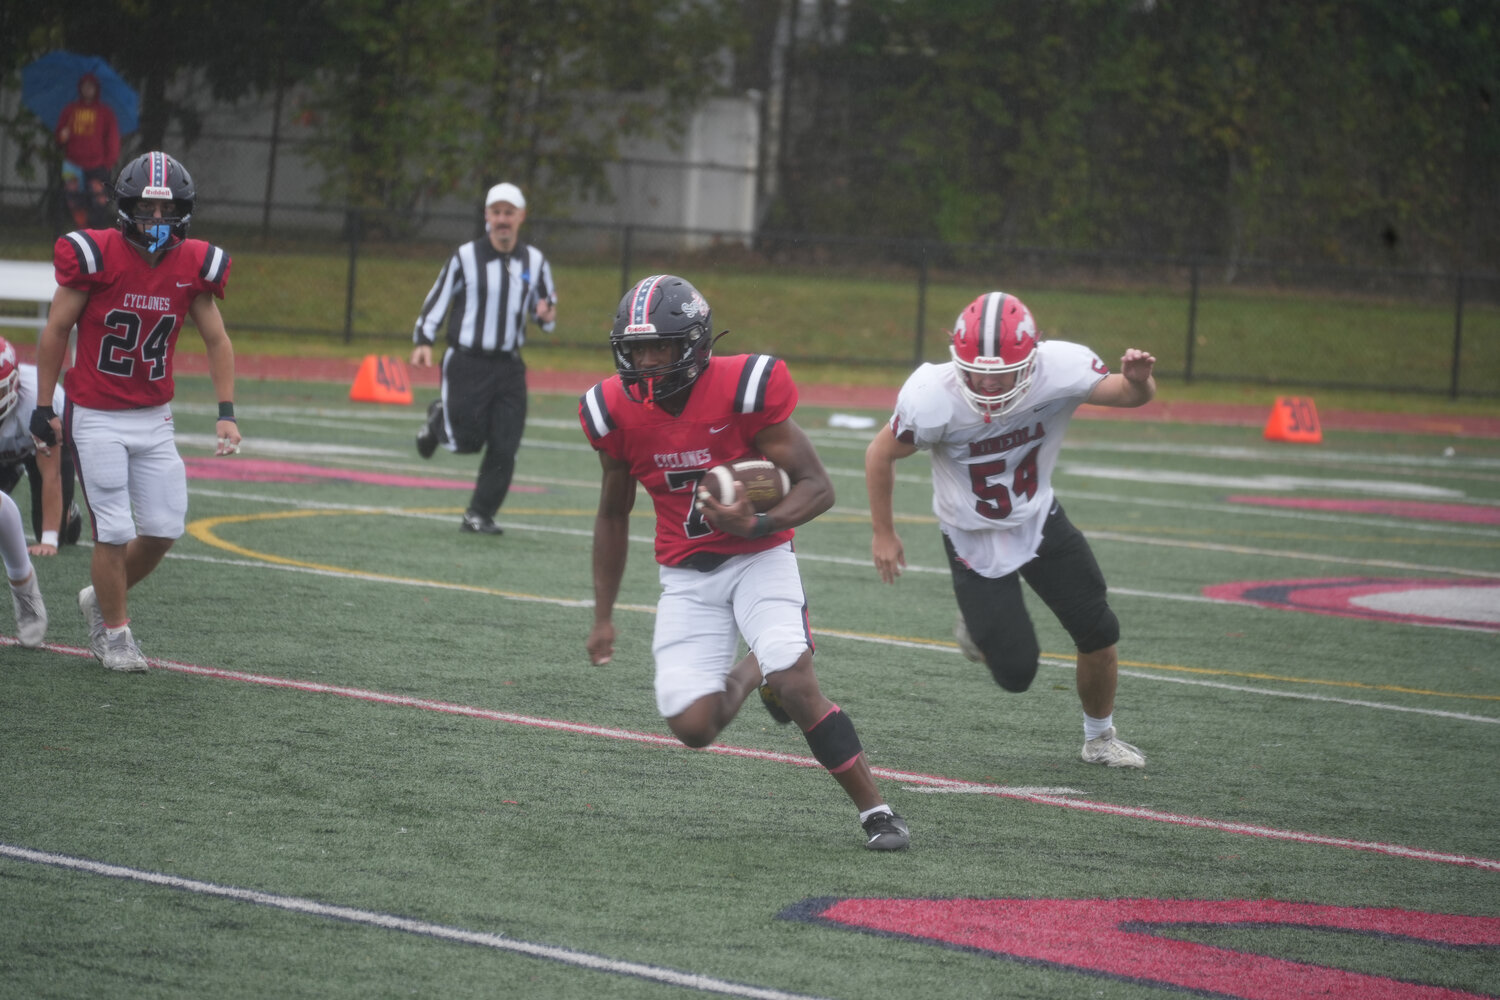 Running back Justin Singh carrying the ball past the Mineola defense.